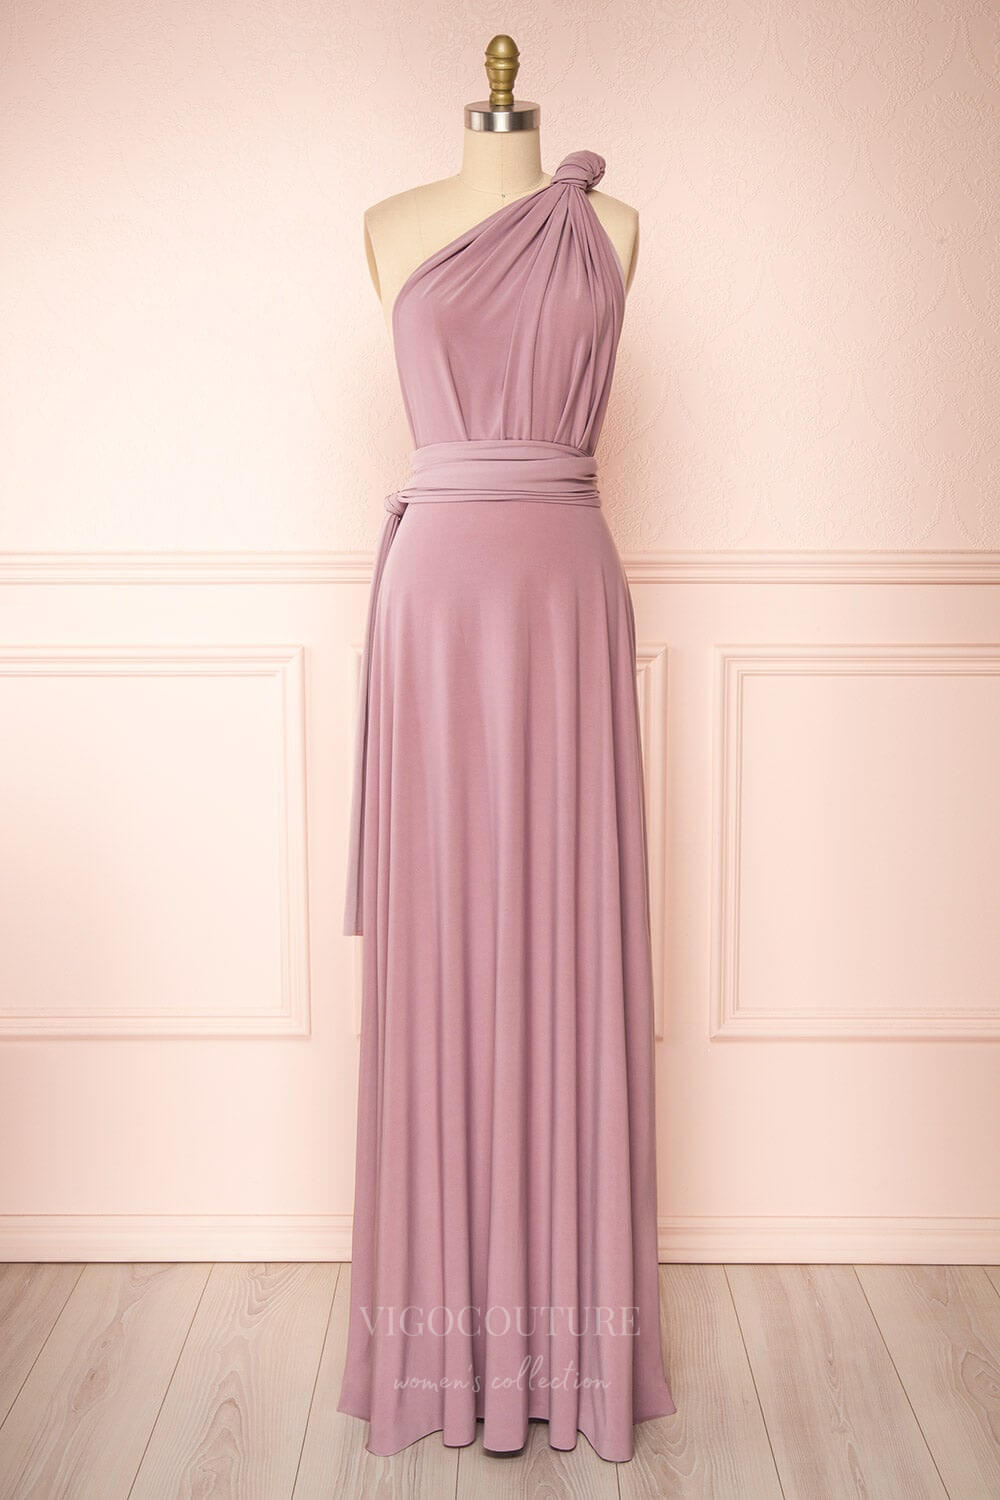 vigocouture-Convertible Bridesmaid Dress Stretchable Woven Dress Pleated Prom Dress Multiway Dress 20860-Dusty Pink-Prom Dresses-vigocouture-Dusty Pink-US2-